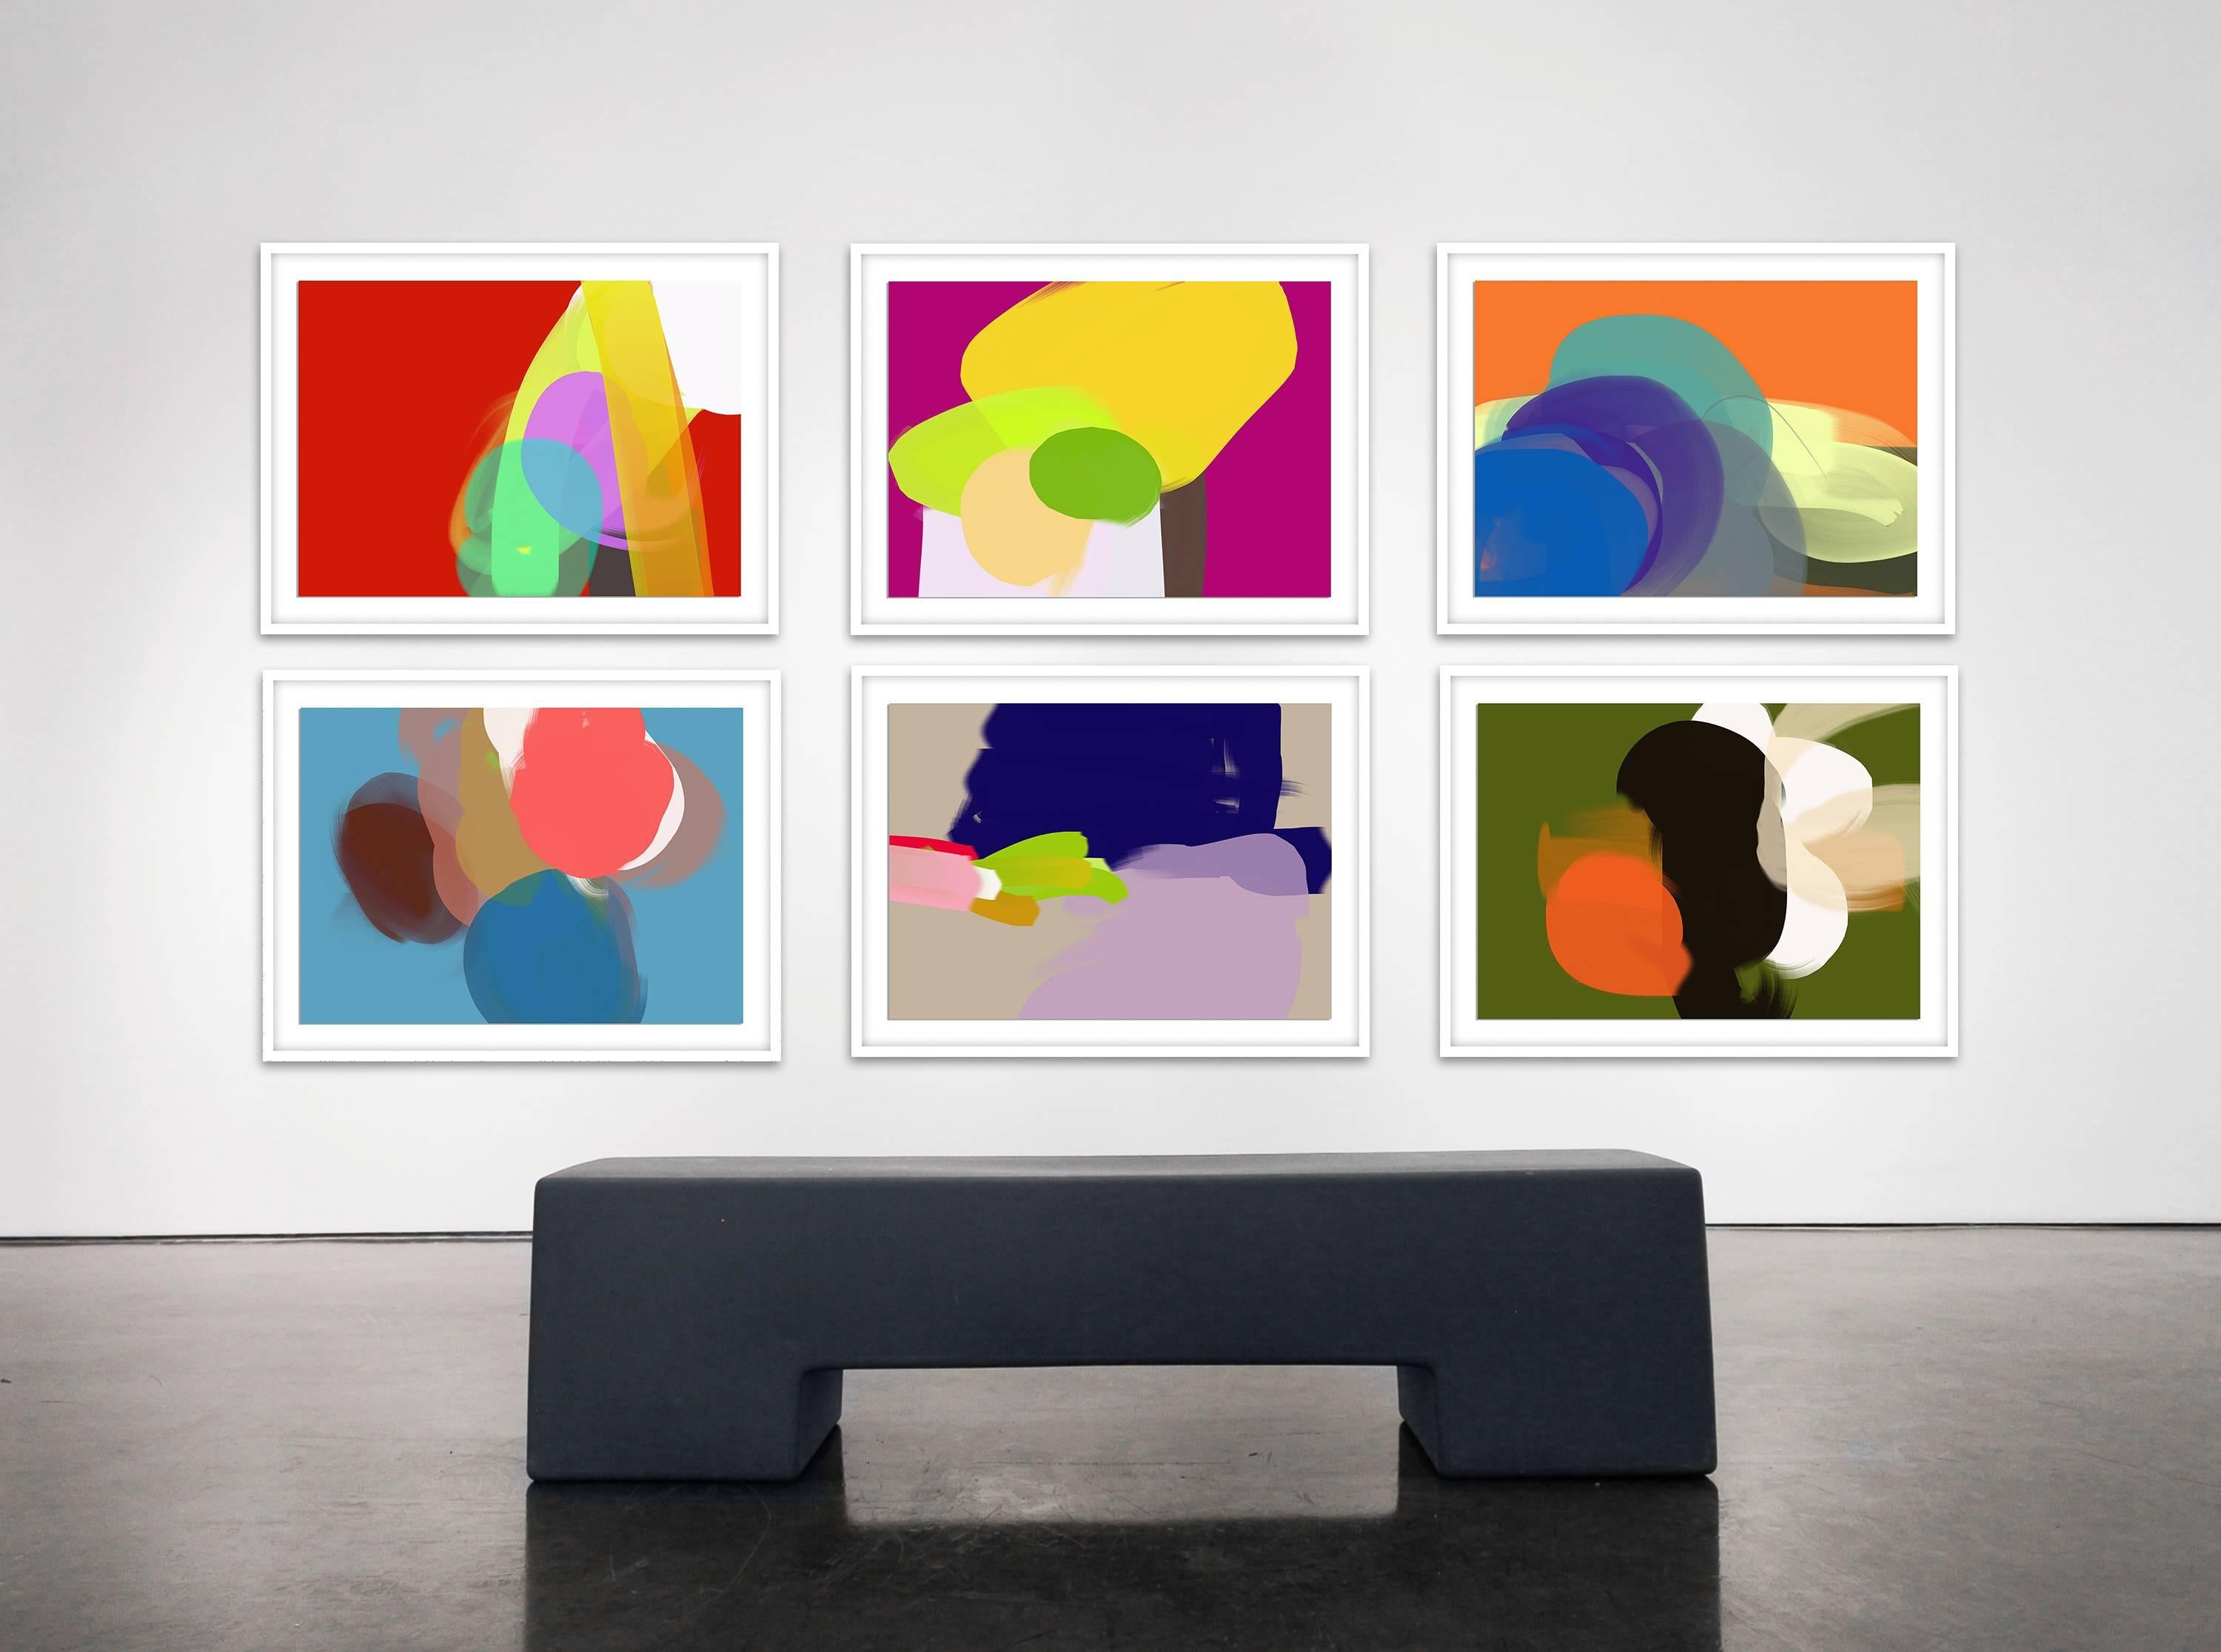 Edition 3/3. 

As part of the New Abstraction movement in Canada, Anda Kubis continues her play with colour, space and illusion. Painterly and improvisational, Kubis’ work continues to capture a screen-like illumination from within the picture with